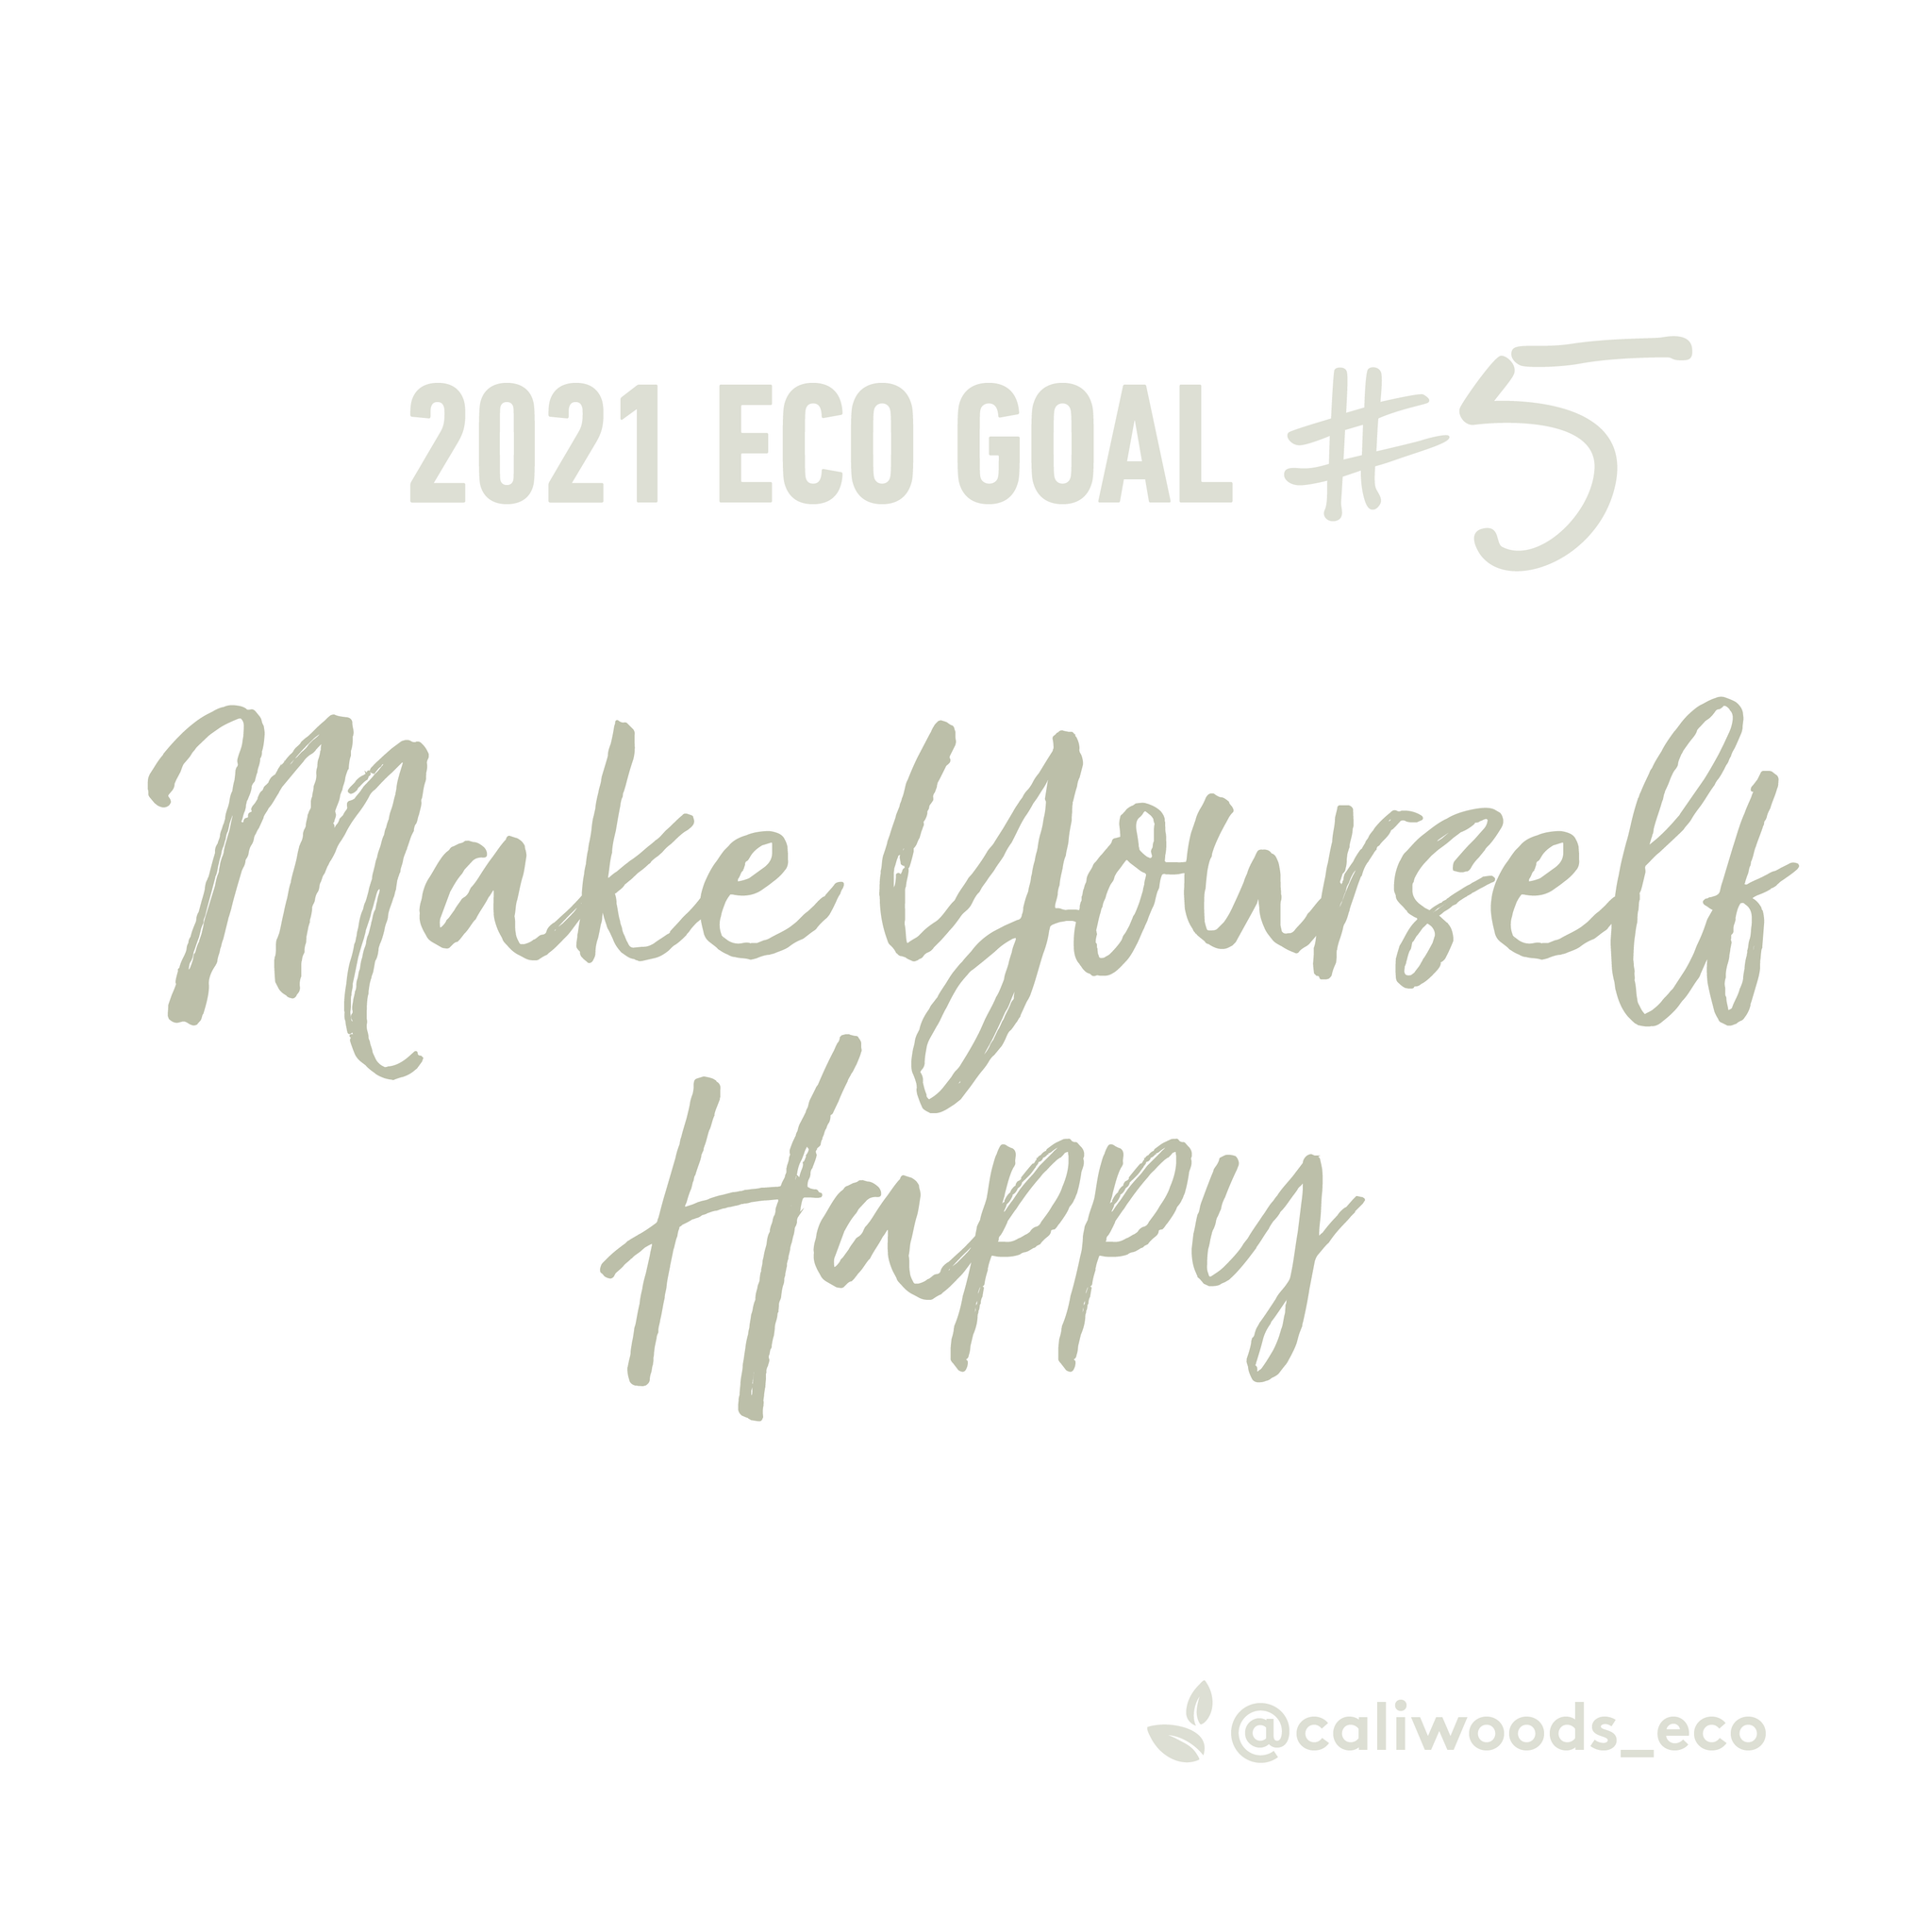 5 Eco Goals for 2021